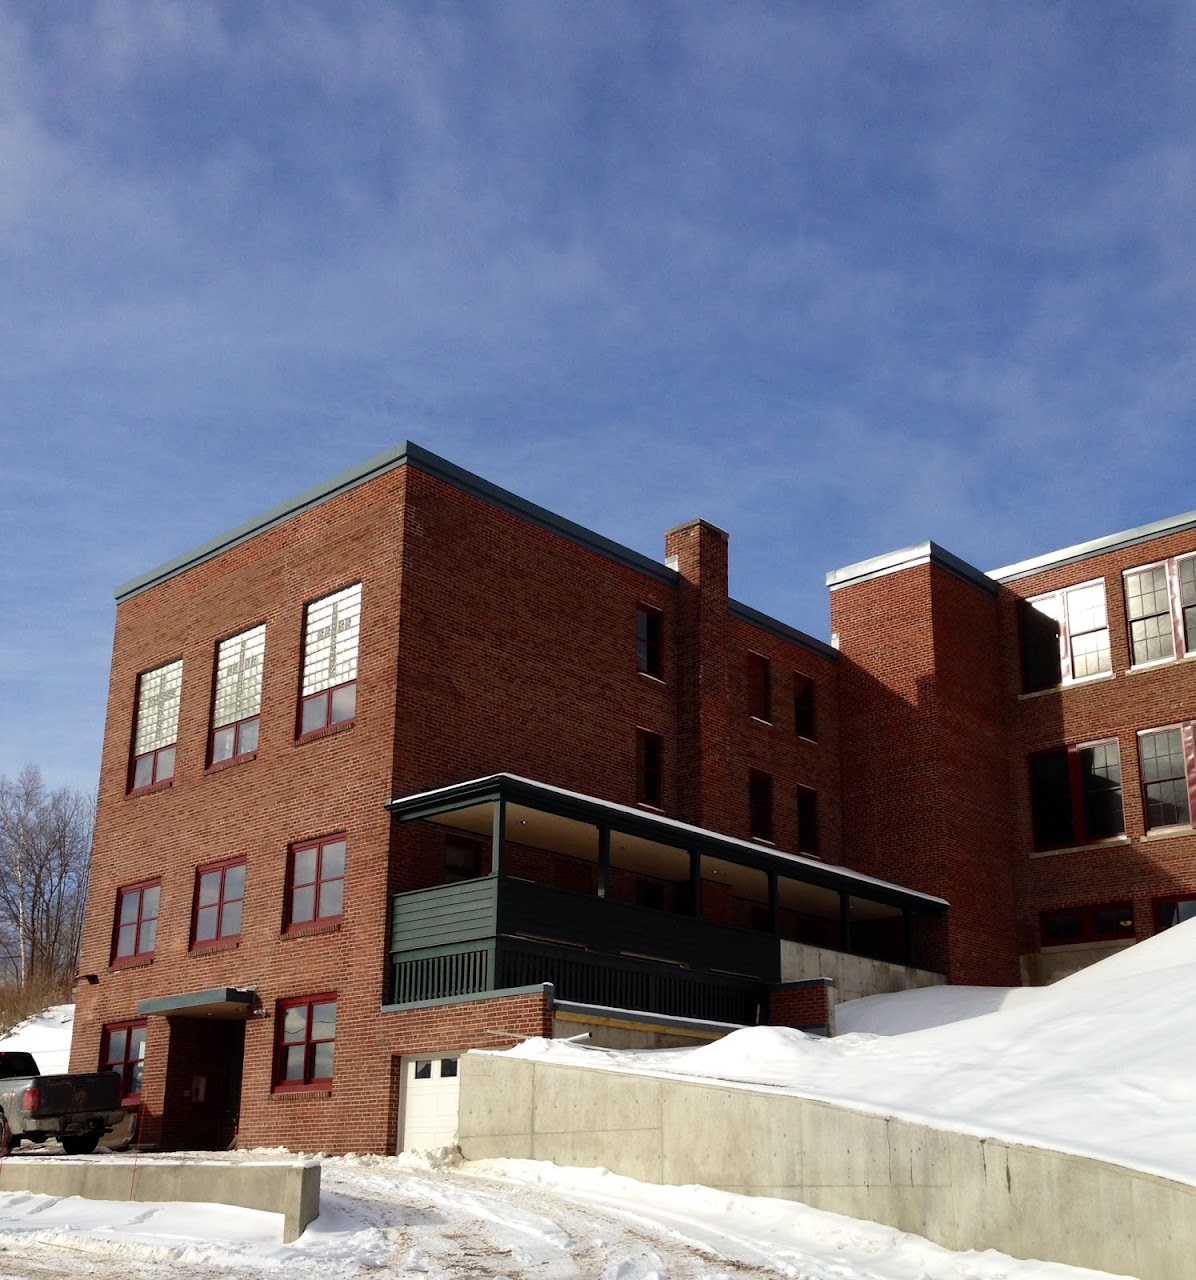 Photo of NOTRE DAME APARTMENTS. Affordable housing located at 411 SCHOOL STREET BERLIN, NH 03570